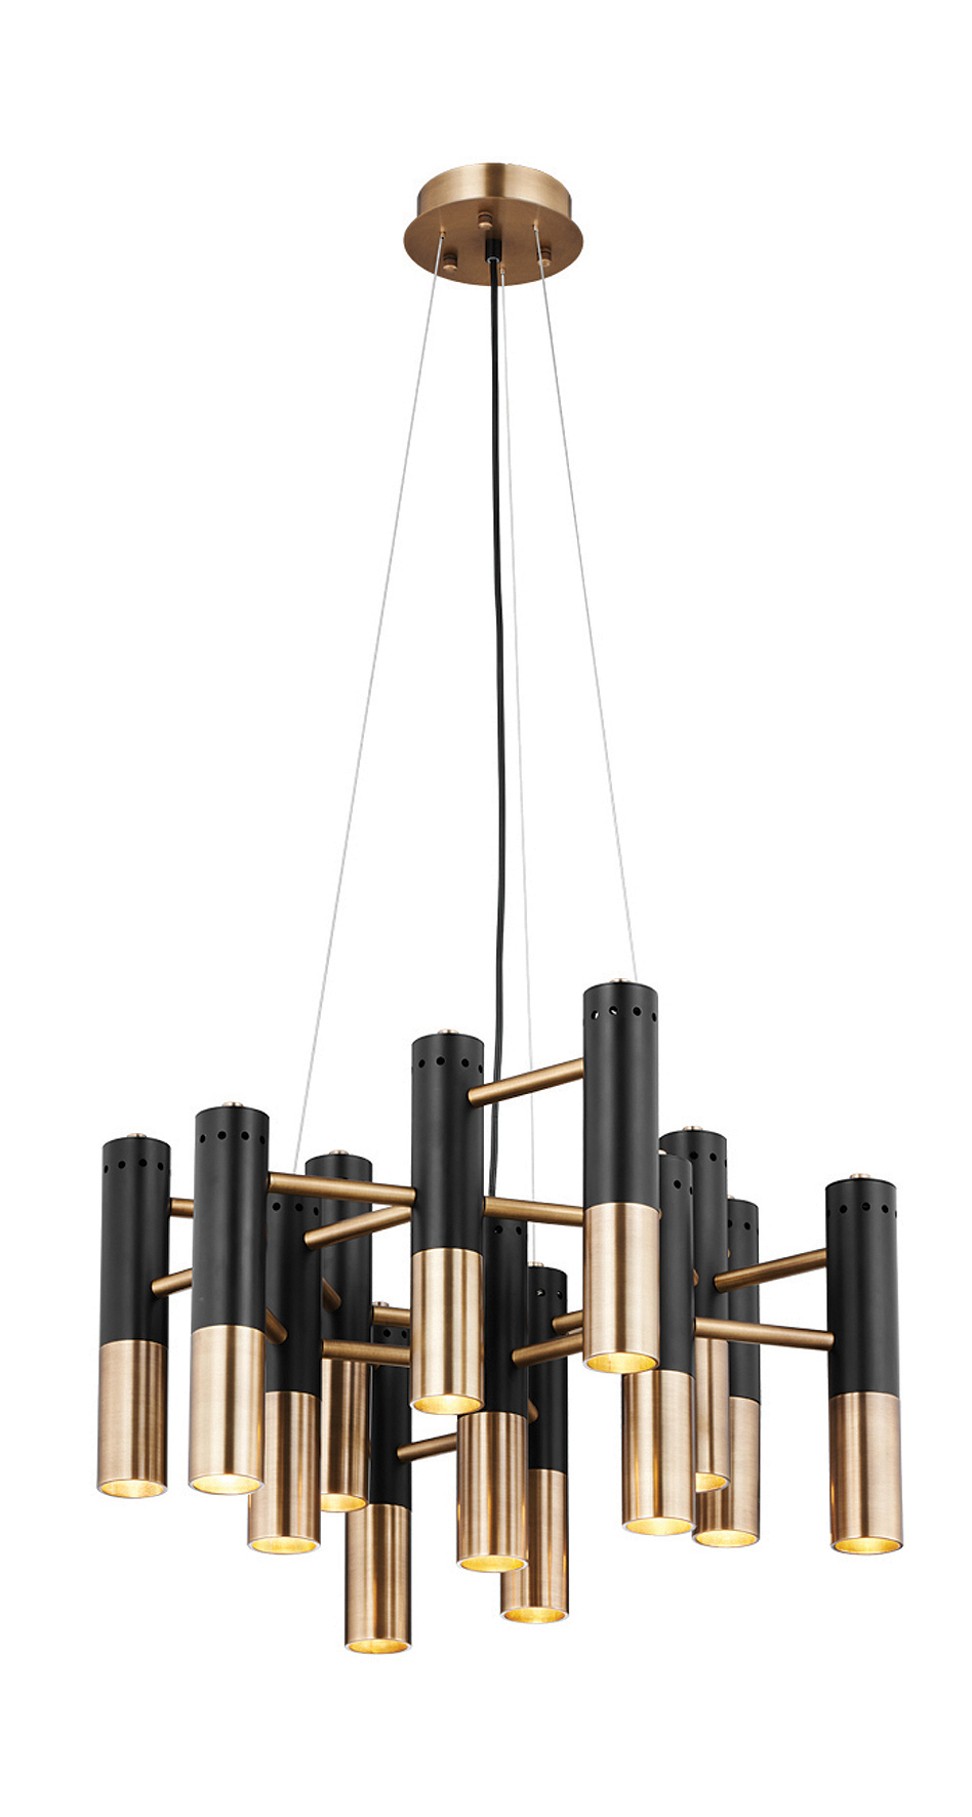 Draw attention to a high ceiling with bold lighting, like this installation from Indigo Living.